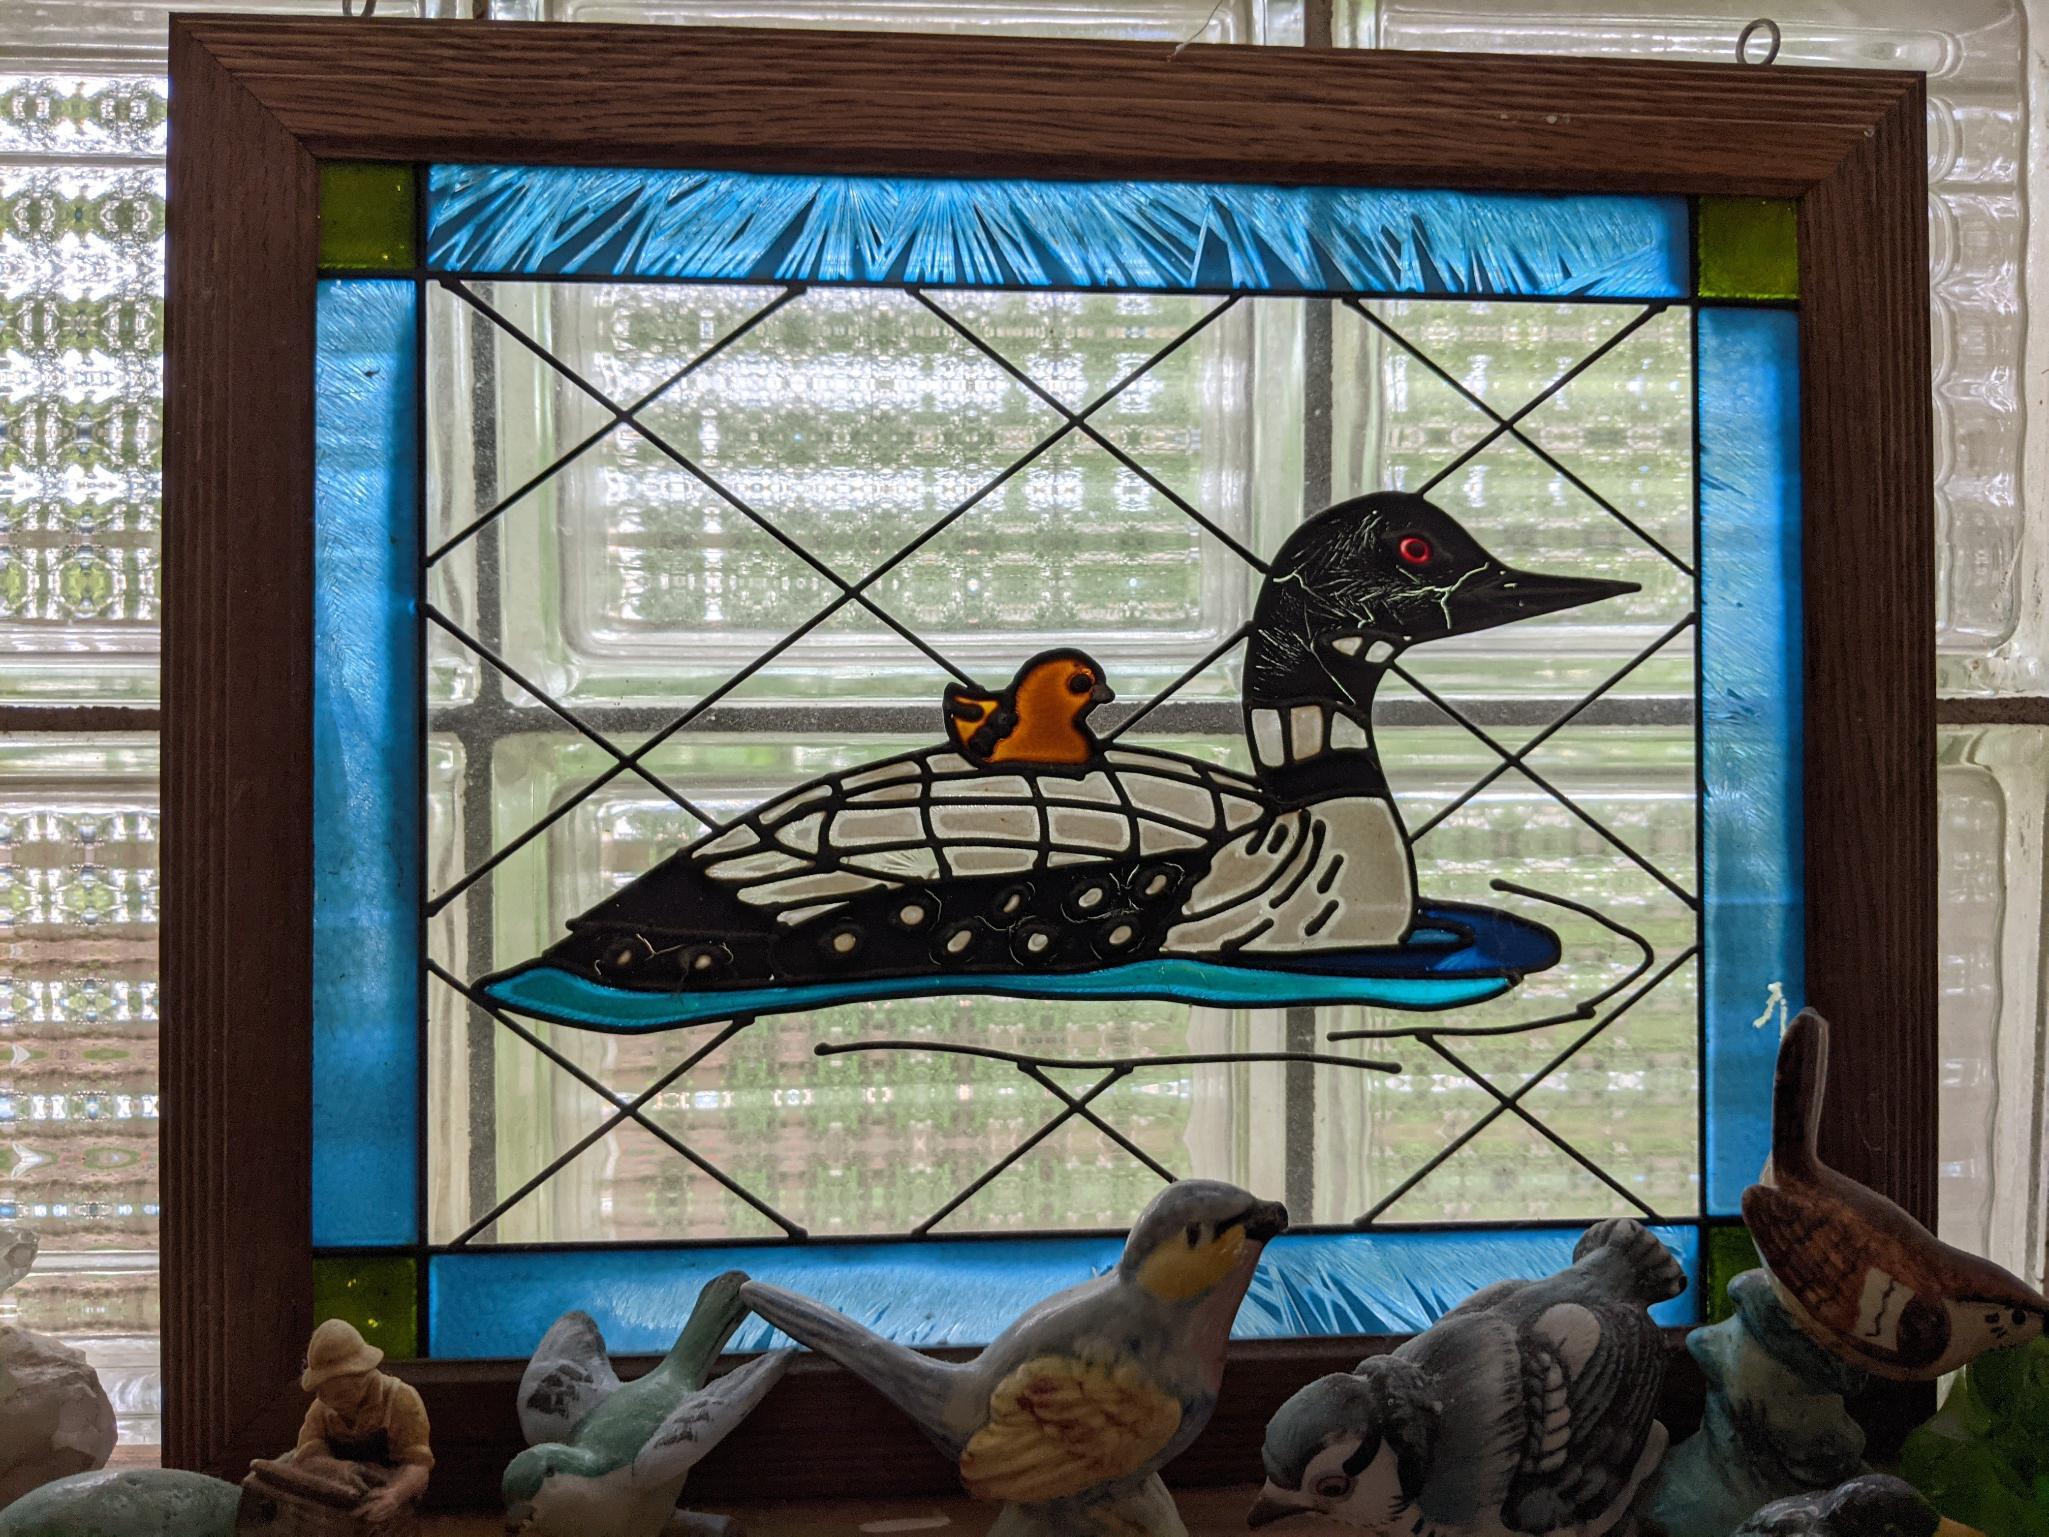 Framed Plastic Stained "Glass" Window with Loon and Figures Grouping